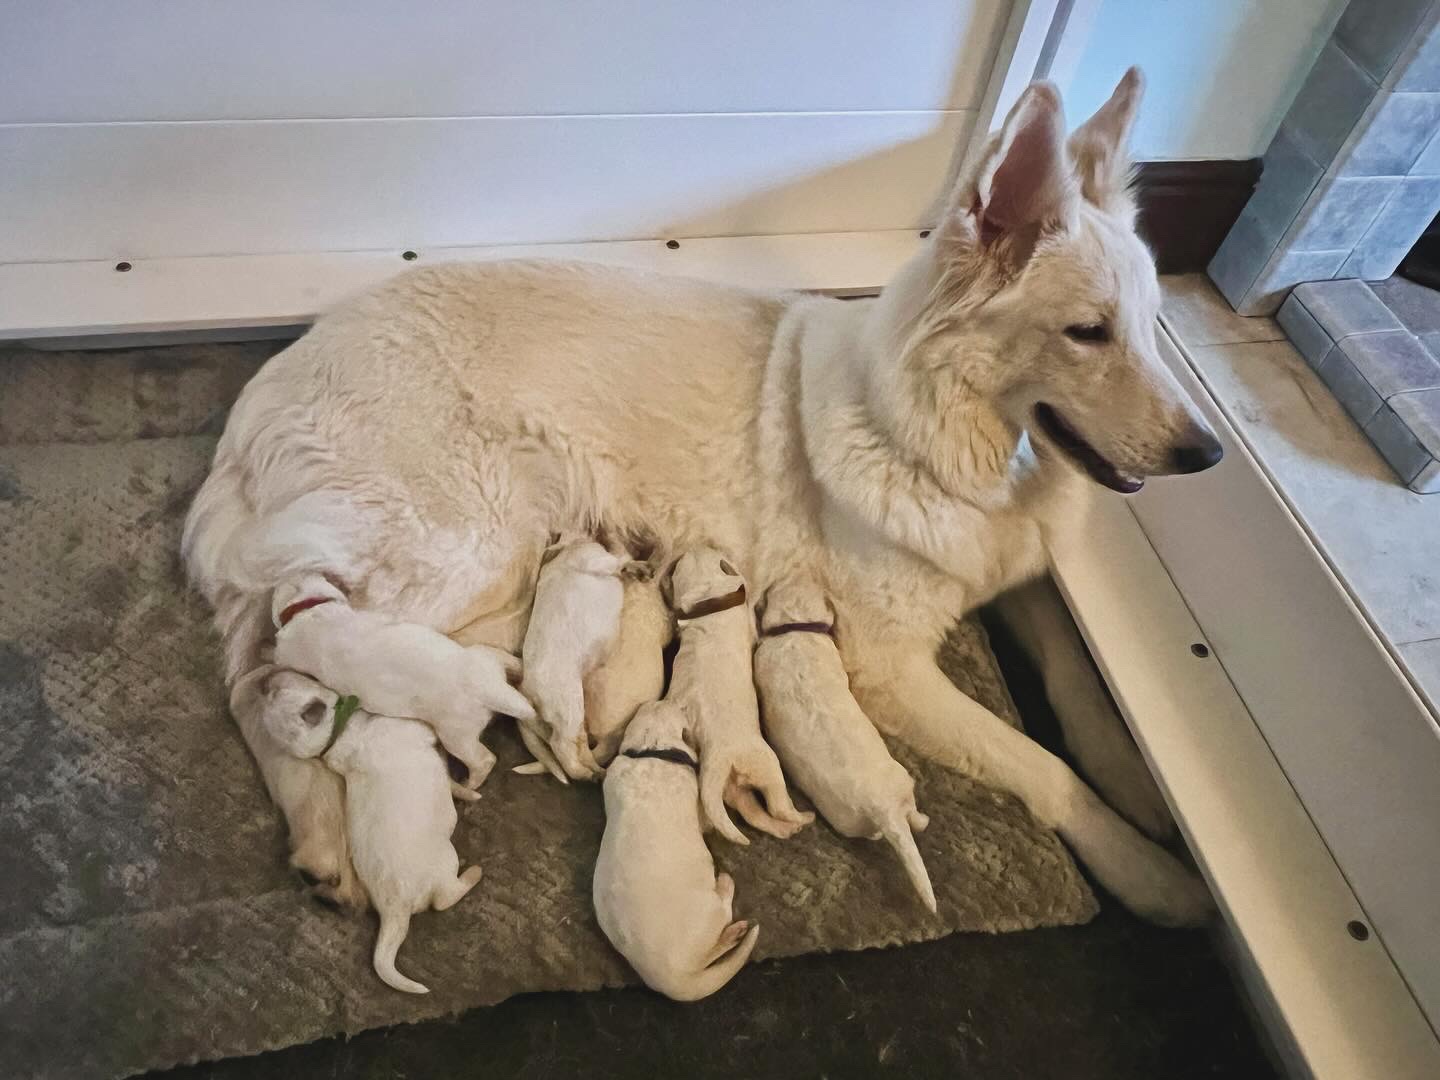 Mum and her brood